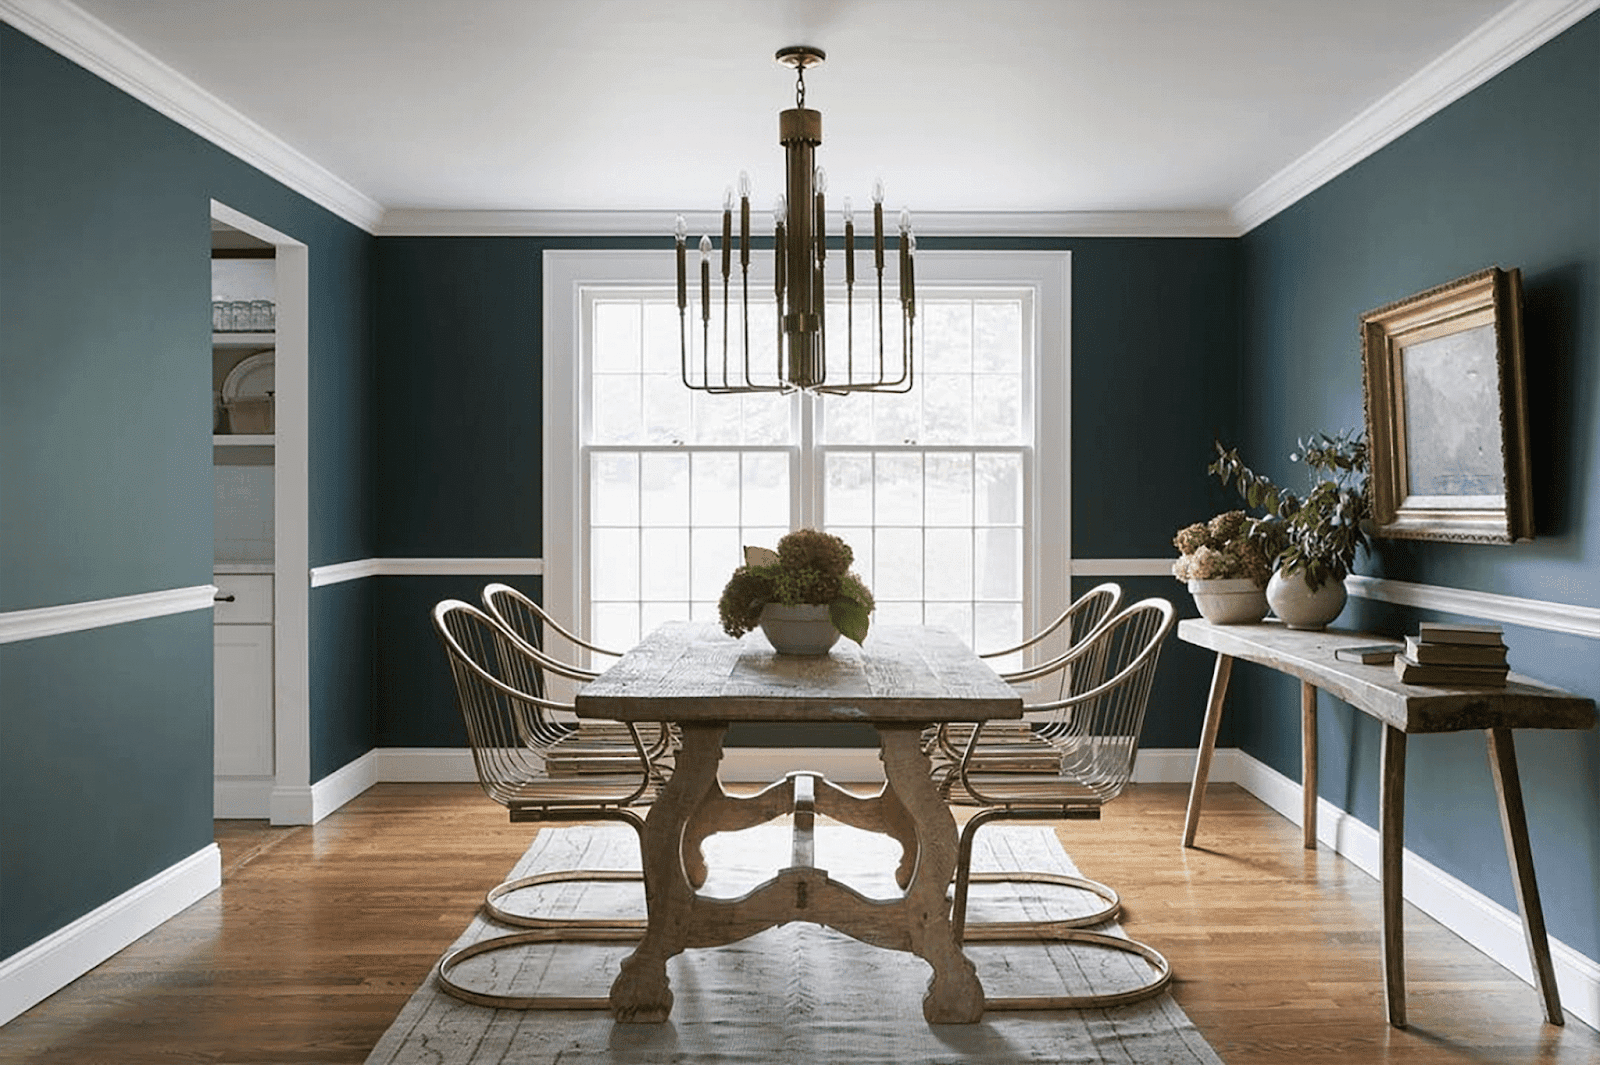 How To Make The Most Of Your Chair Rail, Dining Room Wall Colors With Chair Rail